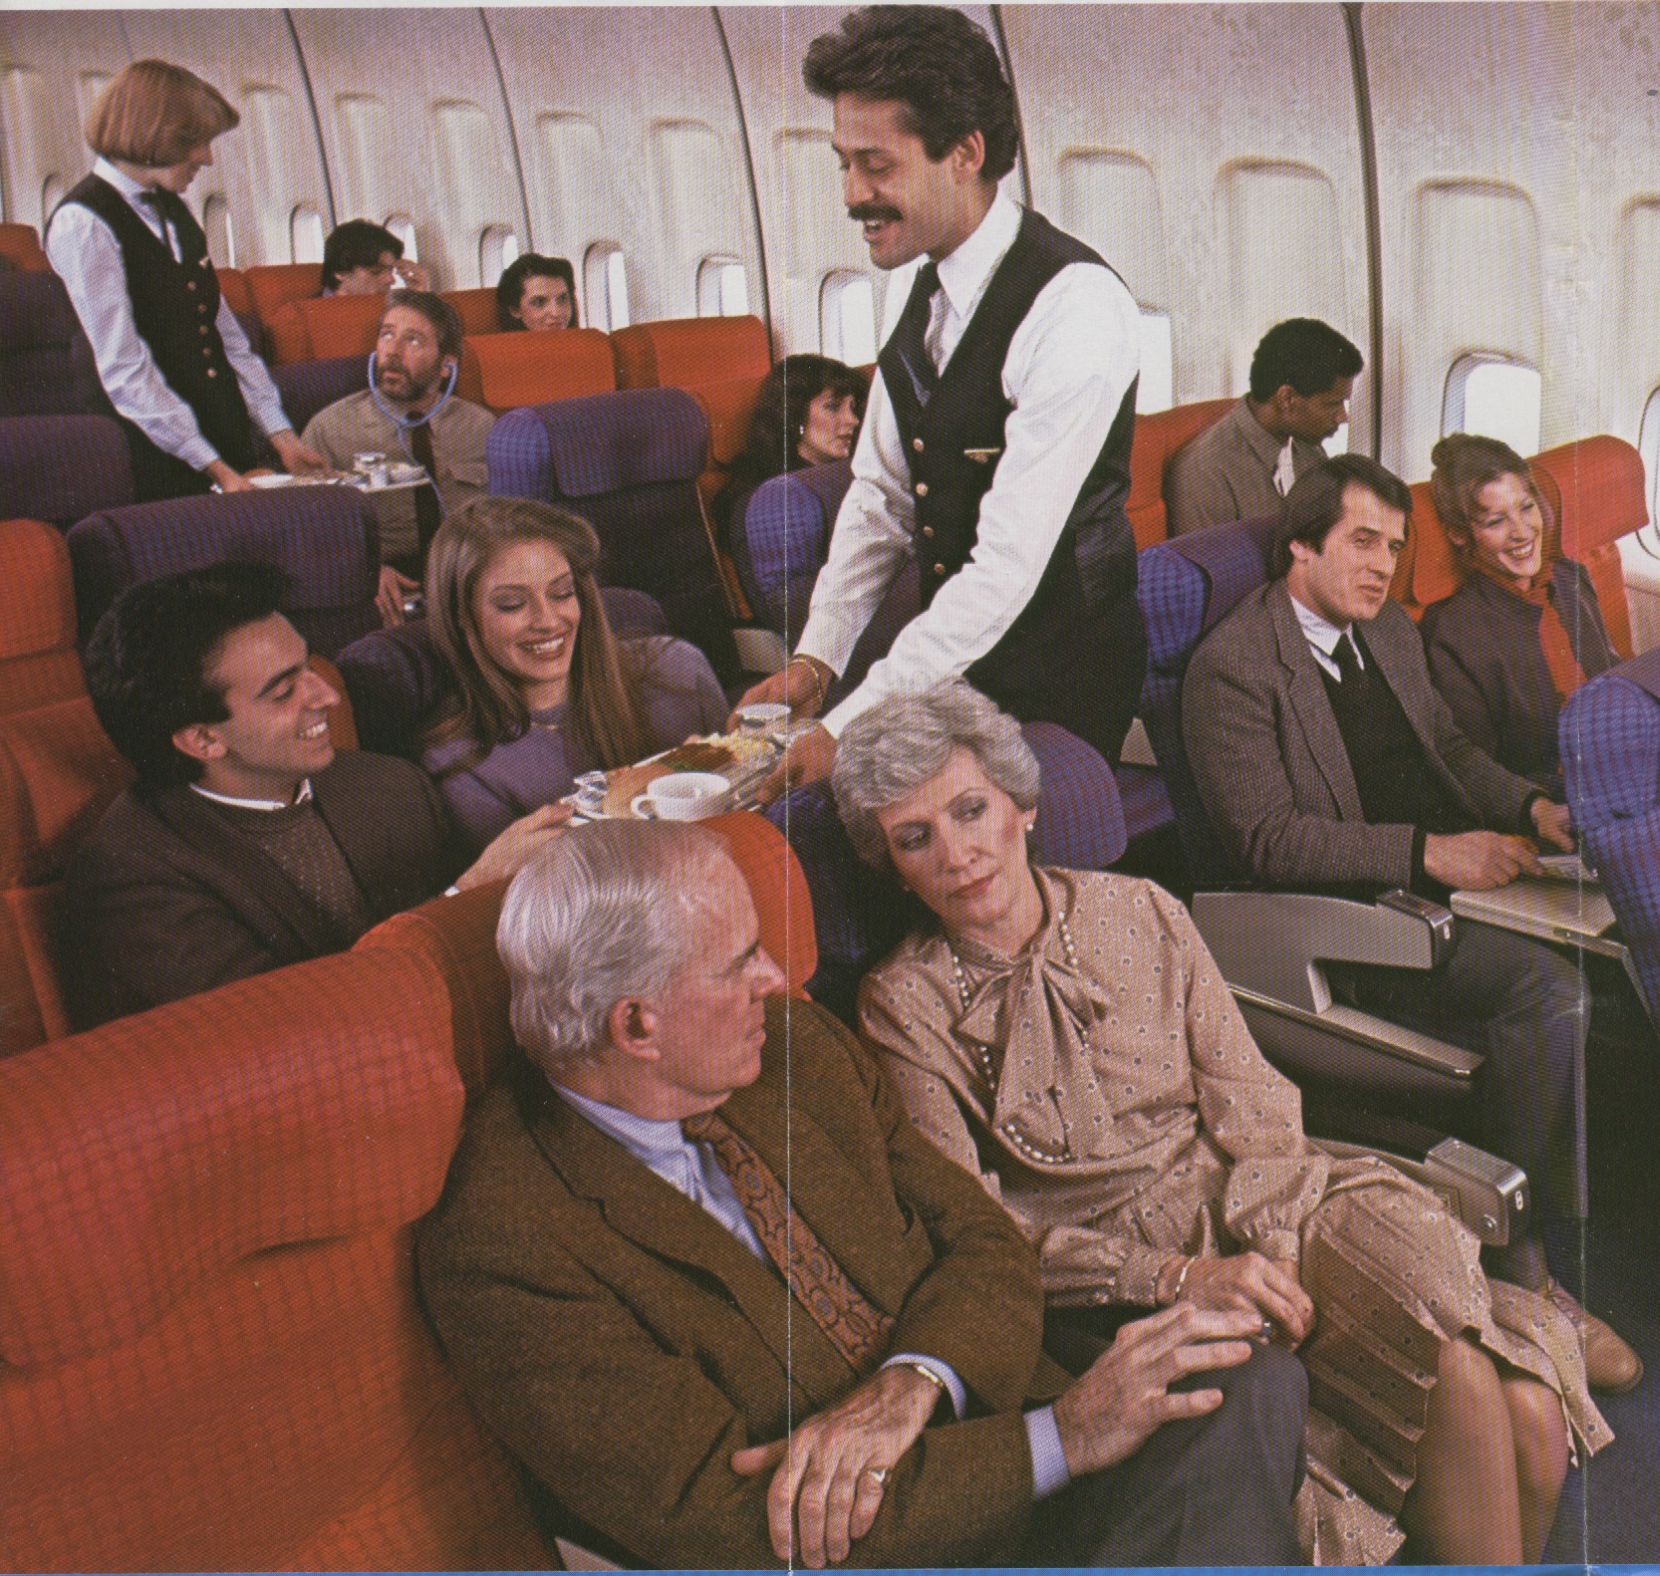 1980s The economy section of a Pan Am 747 during meal service.  The male flight attendant is Carlos Rosalino.